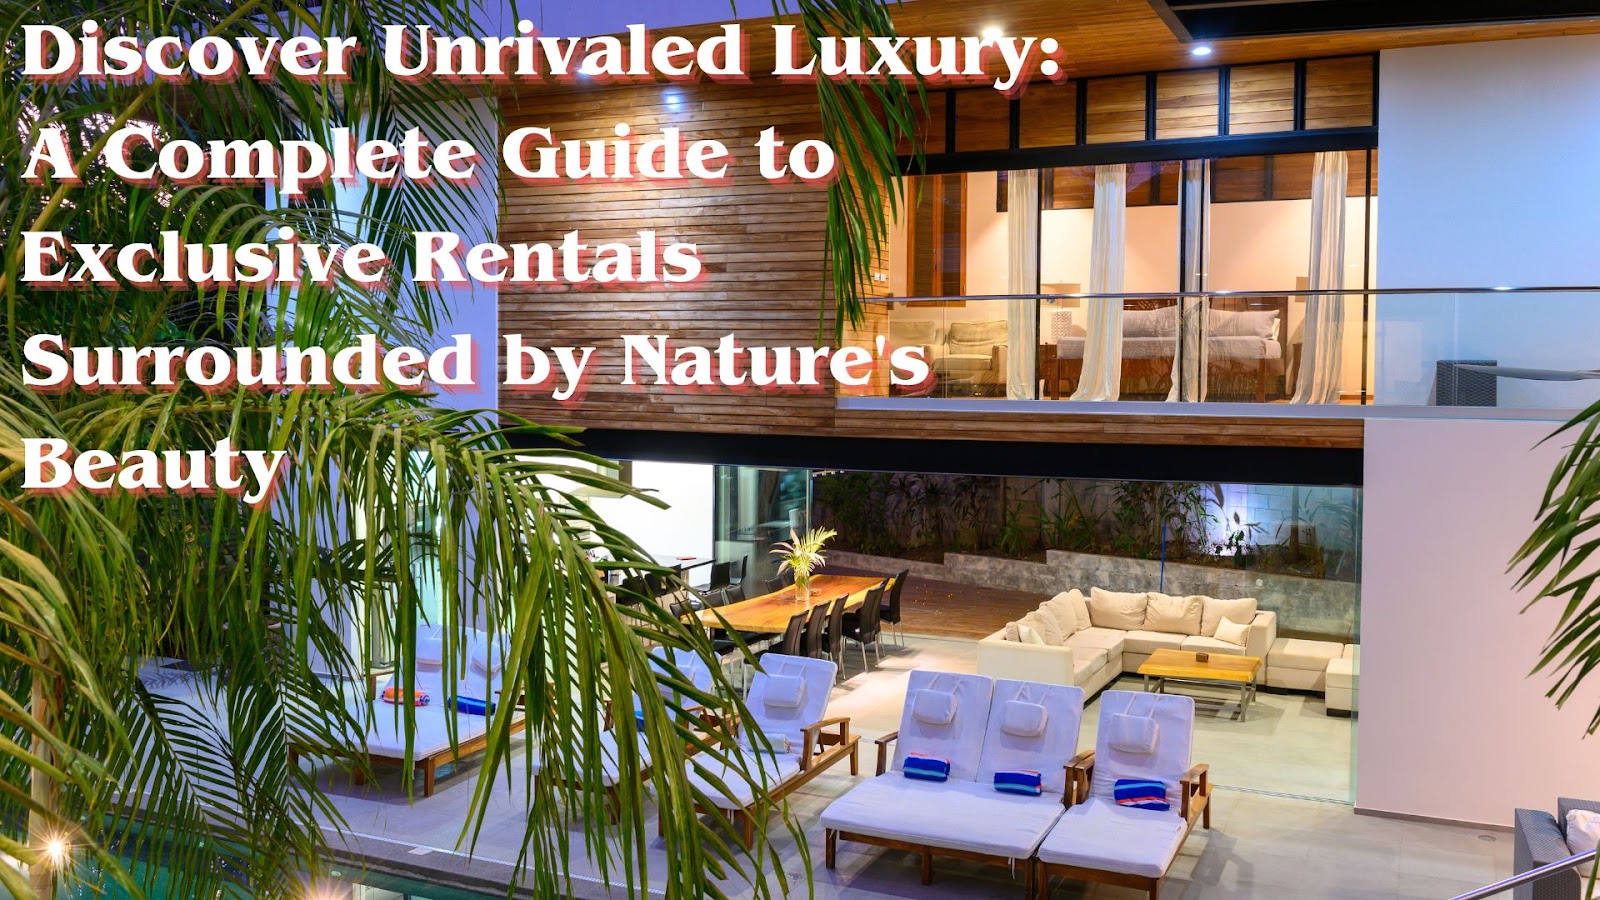 Discover Unrivaled Luxury: A Complete Guide to Exclusive Rentals Surrounded by Nature’s Beauty